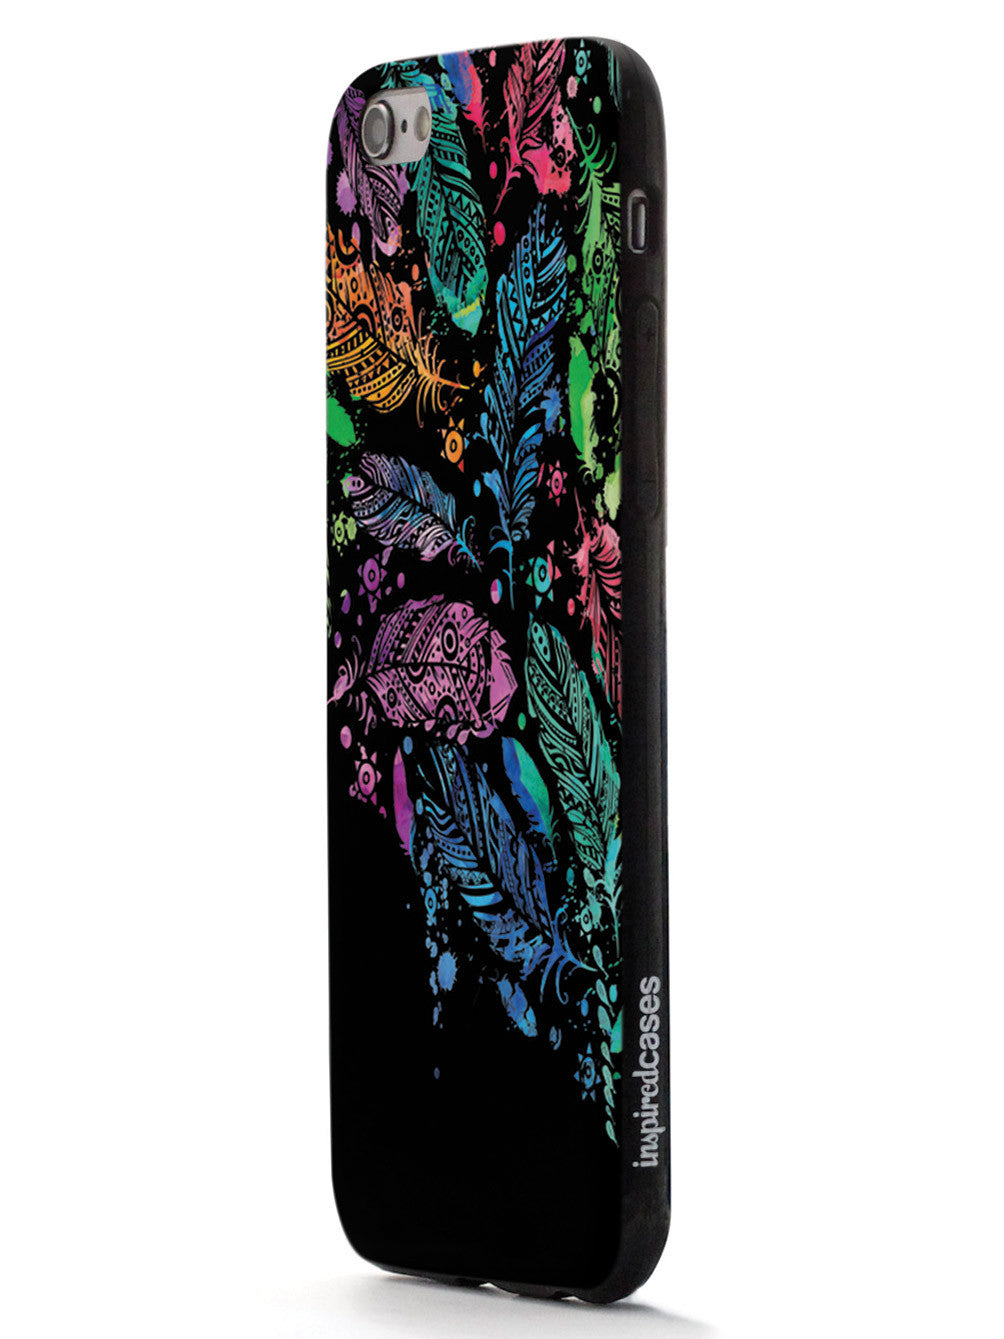 Watercolor Feathers - Black Case